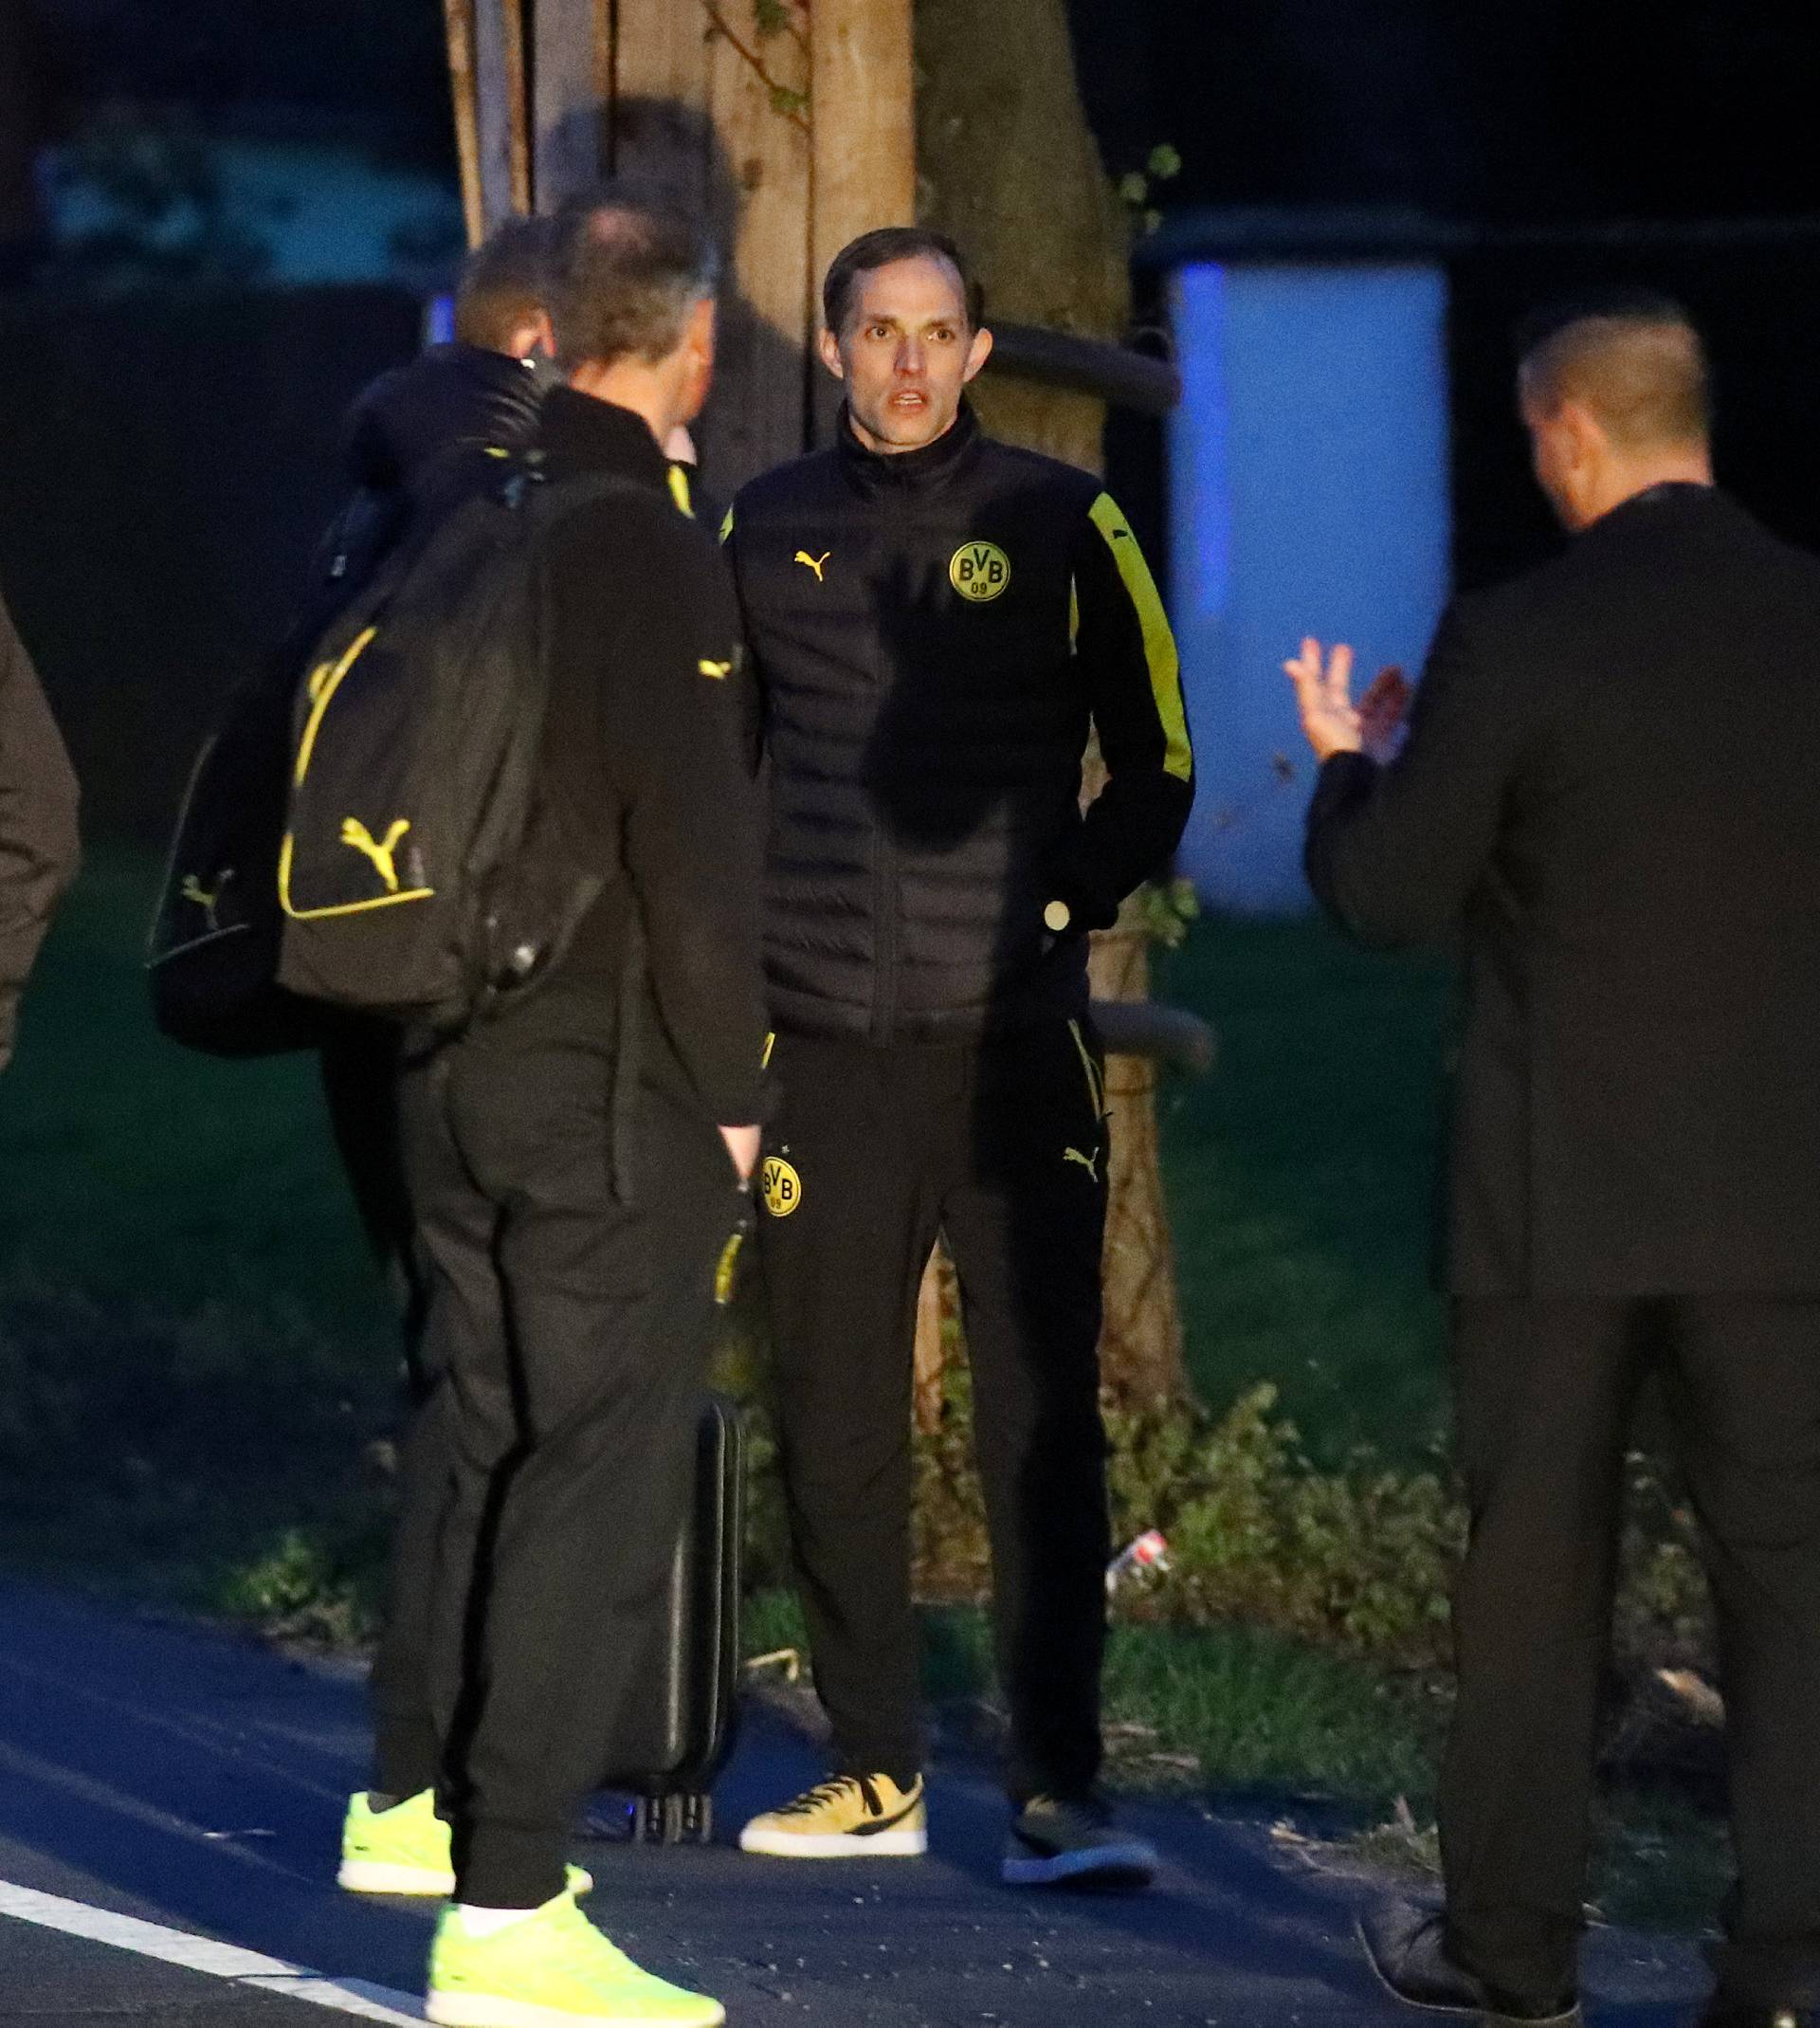 Borussia Dortmund coach Thomas Tuchel is seen by the team bus after an explosion near their hotel before the game